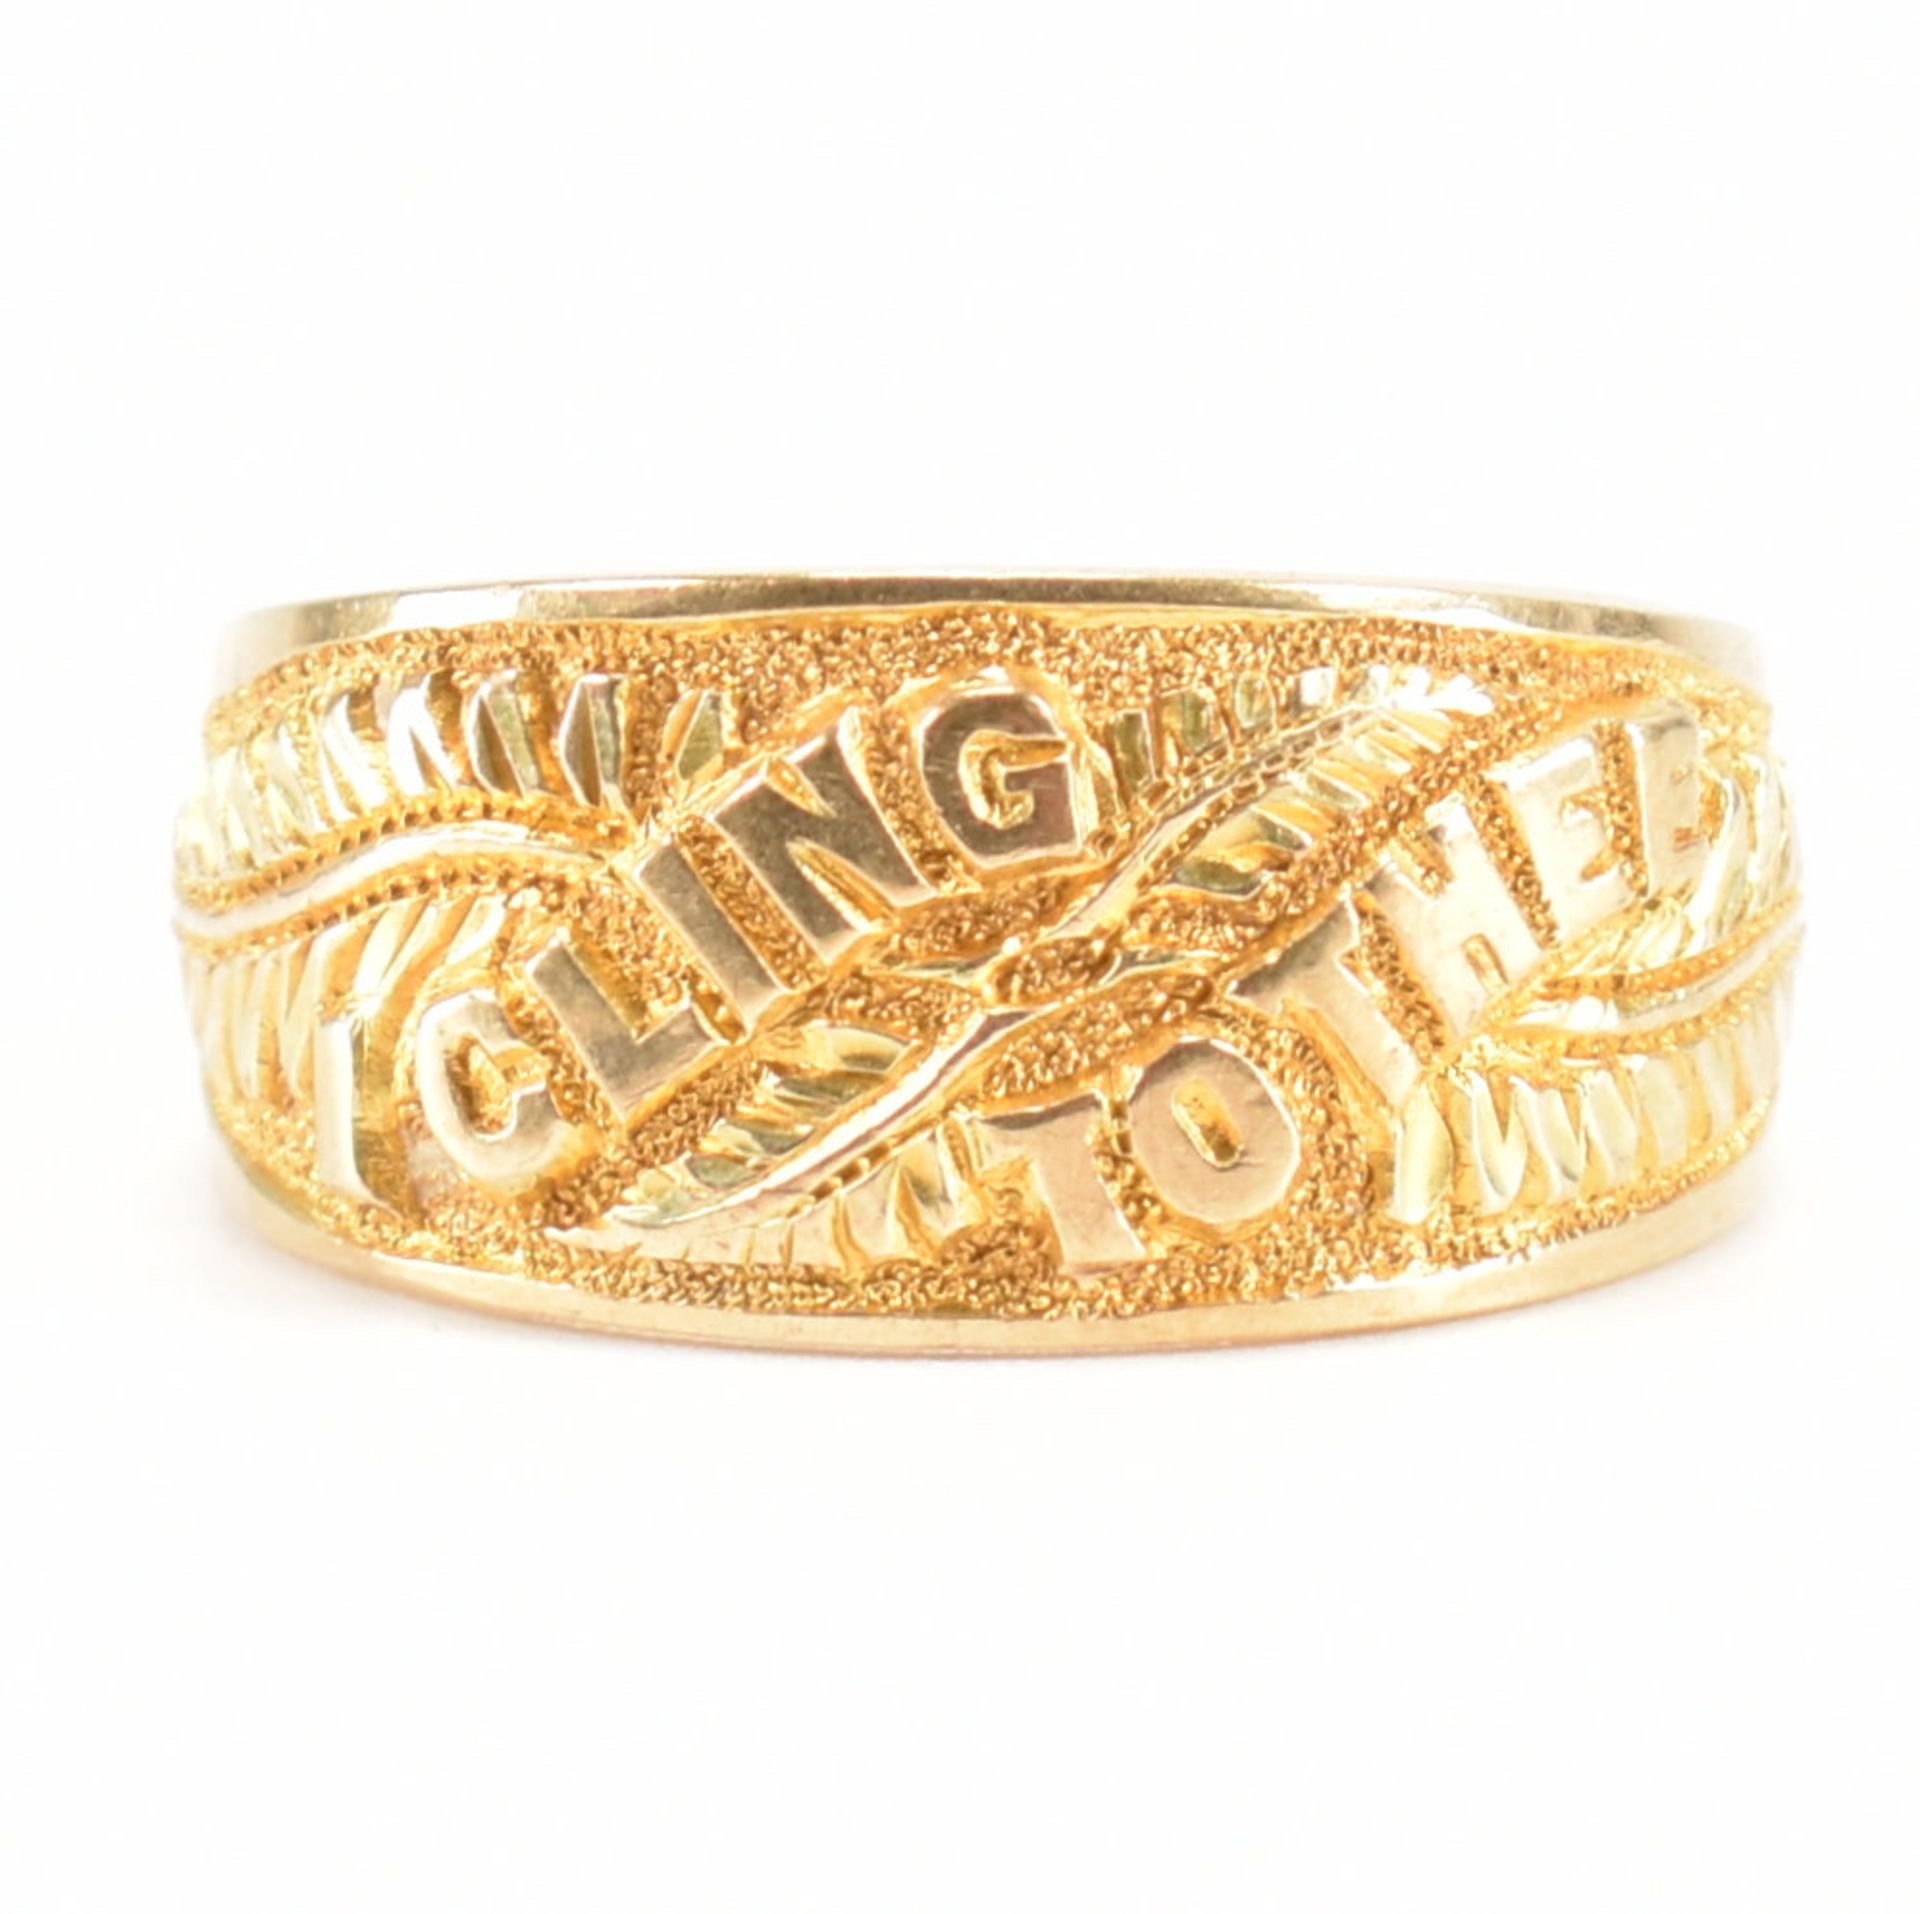 HALLMARKED VICTORIAN 9CT GOLD ETCHED BAND RING